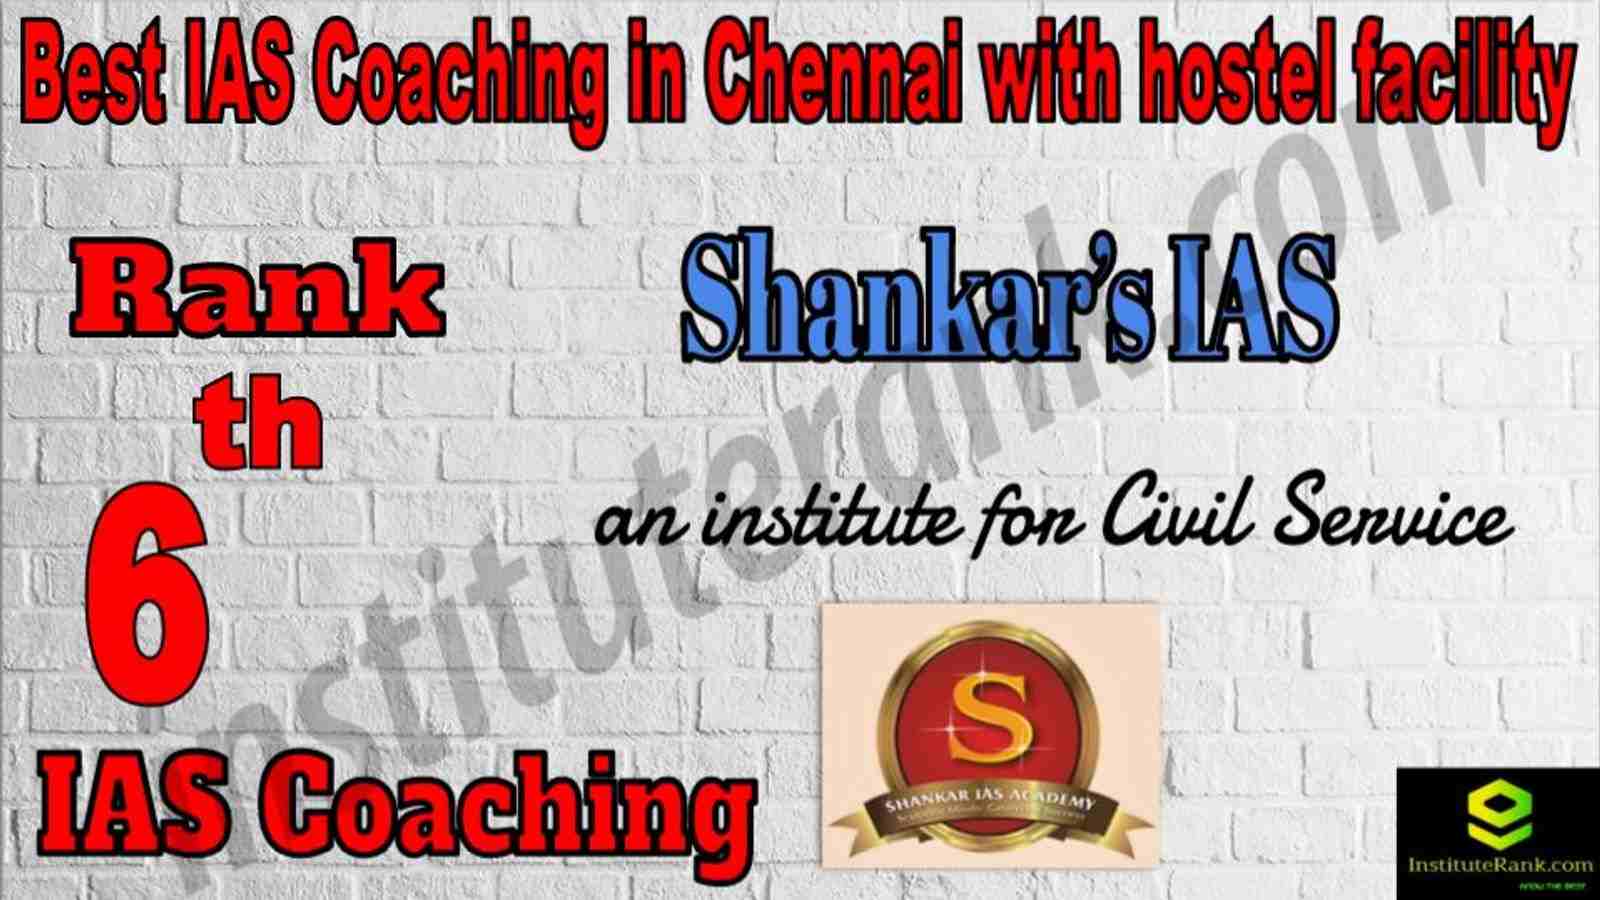 6th Best IAS Coaching in Chennai with hostel facility